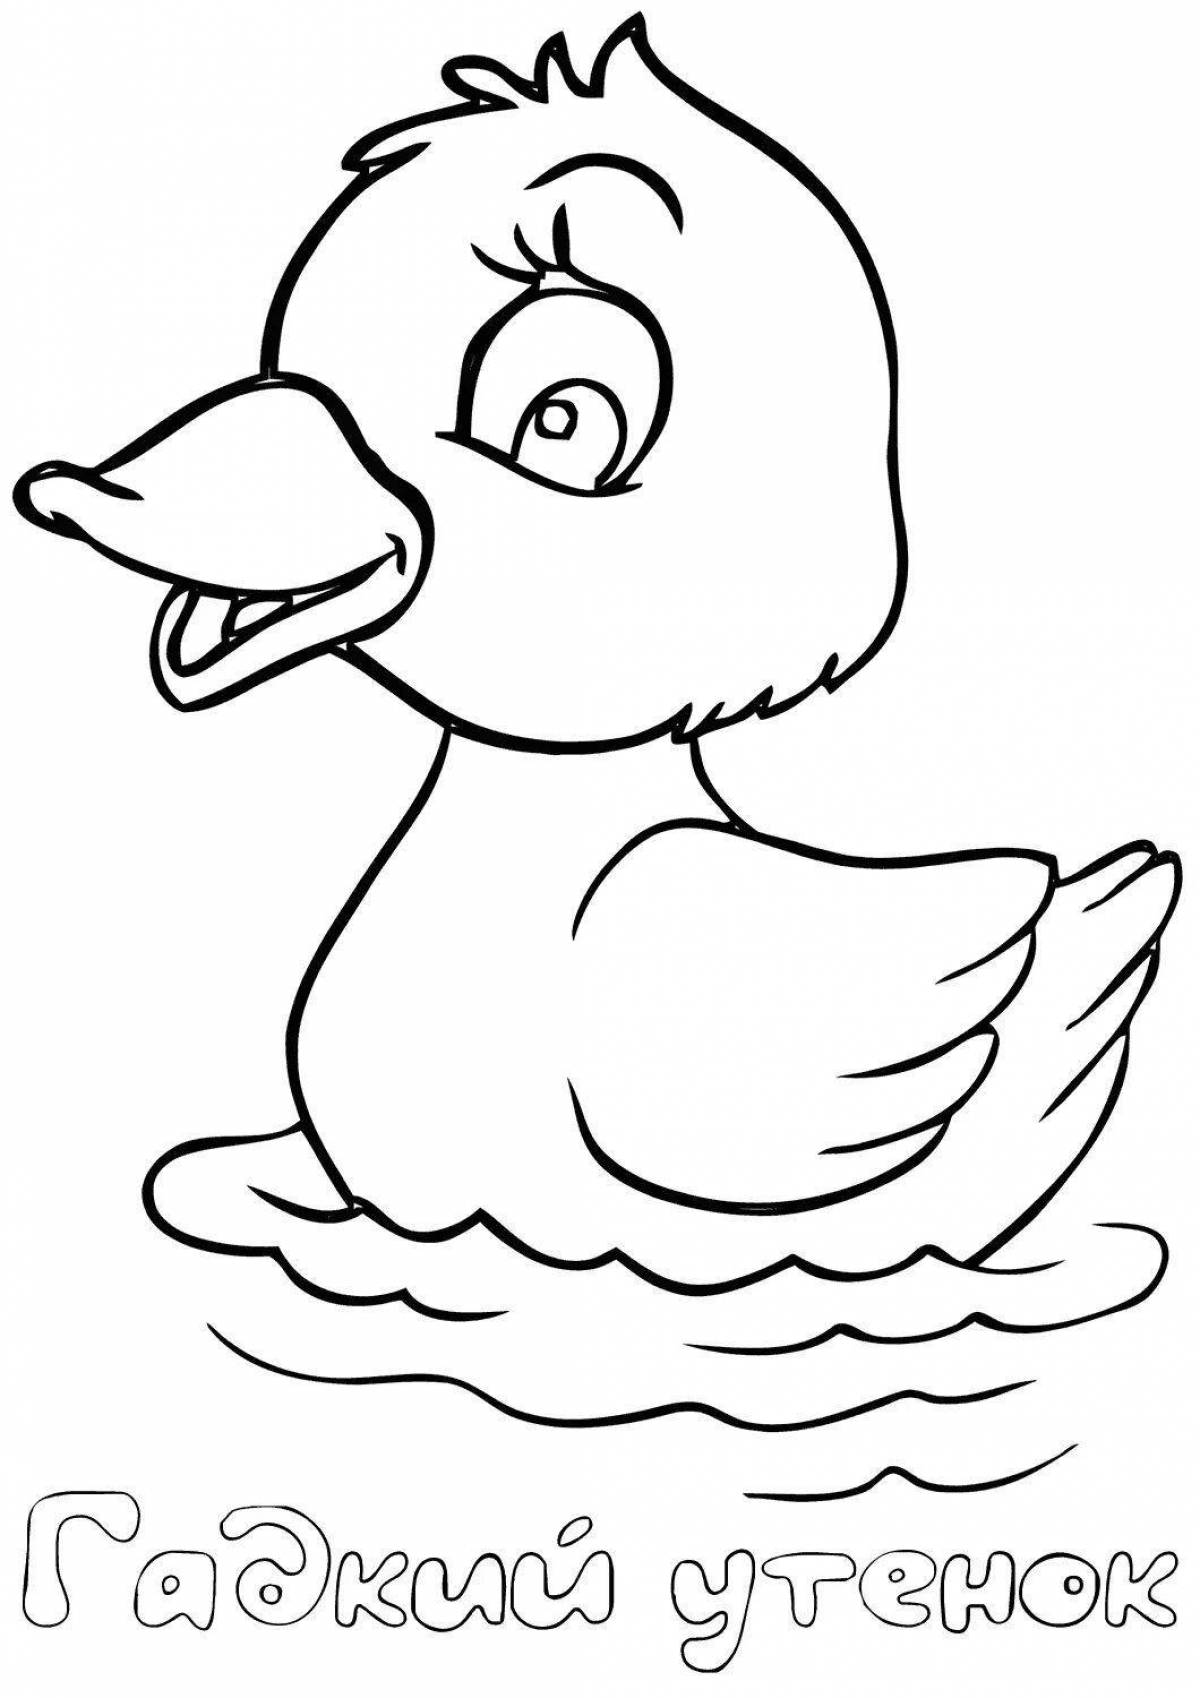 Coloring duck for children 3-4 years old